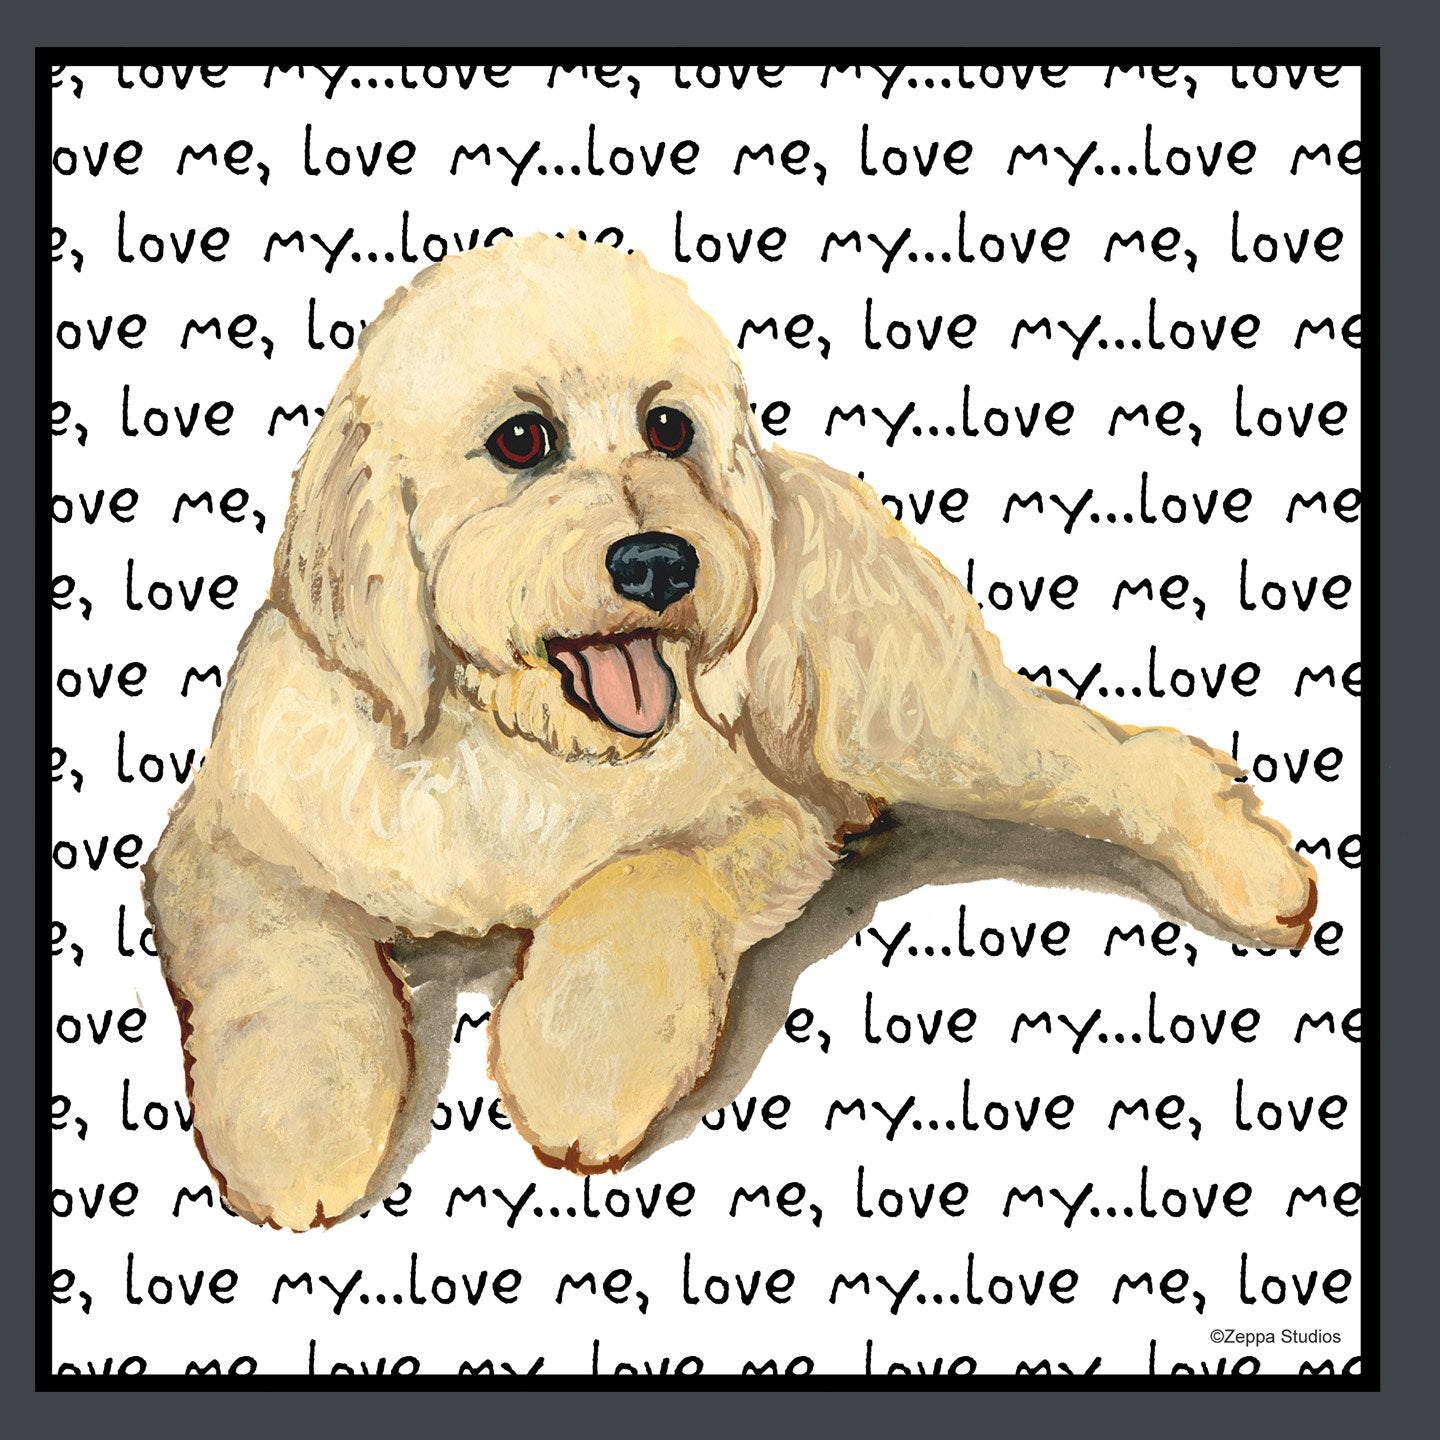 Goldendoodle Love - Women's Fitted T-Shirt